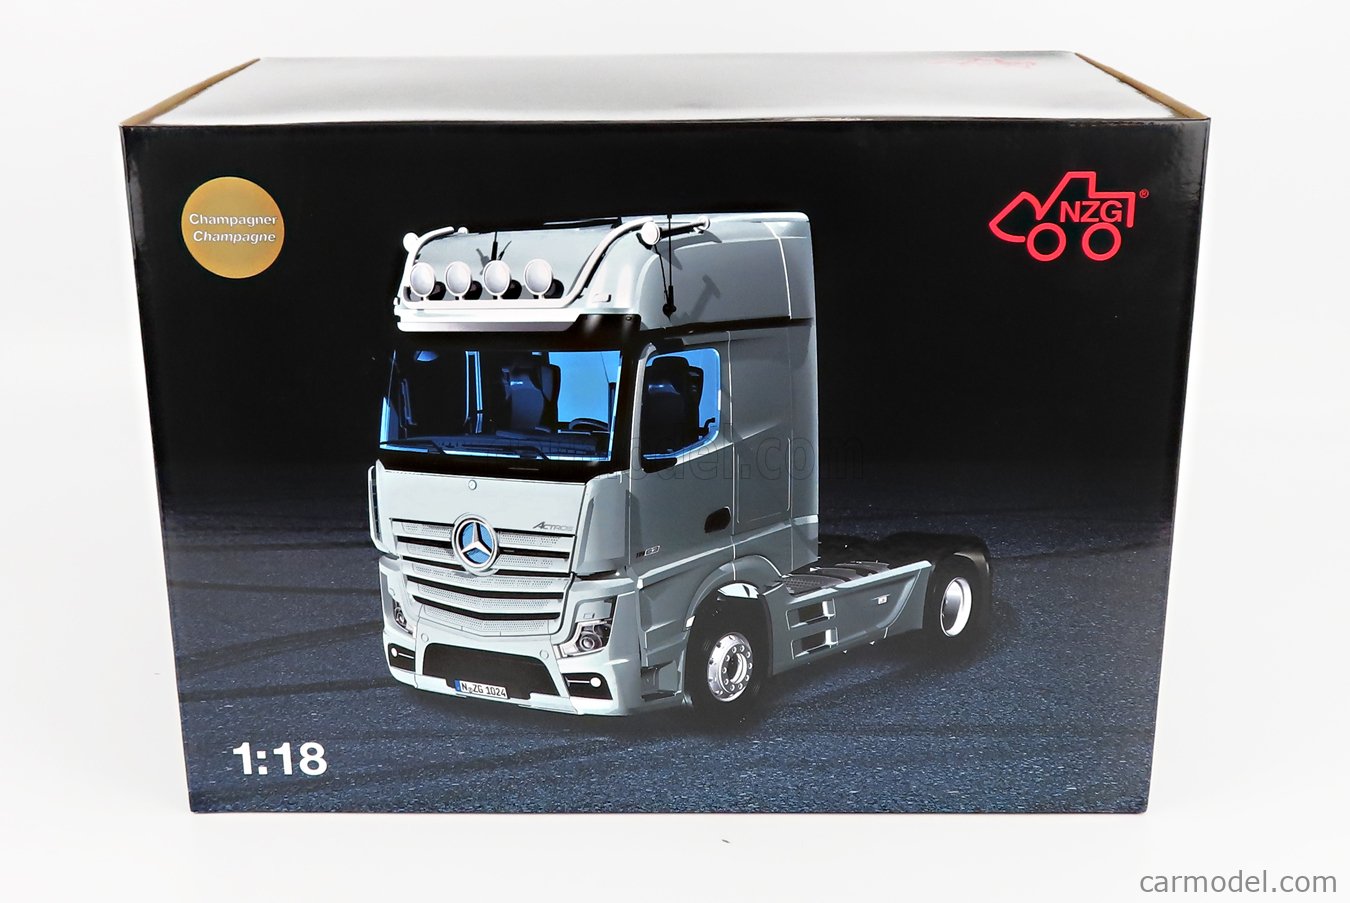 NZG LM10240066 Scale 1/18  MERCEDES BENZ ACTROS 2 1863 GIGASPACE 4x2 MIRRORCAM TRACTOR TRUCK LOGO MERCEDES 2-ASSI 2018 CHAMPAGNE